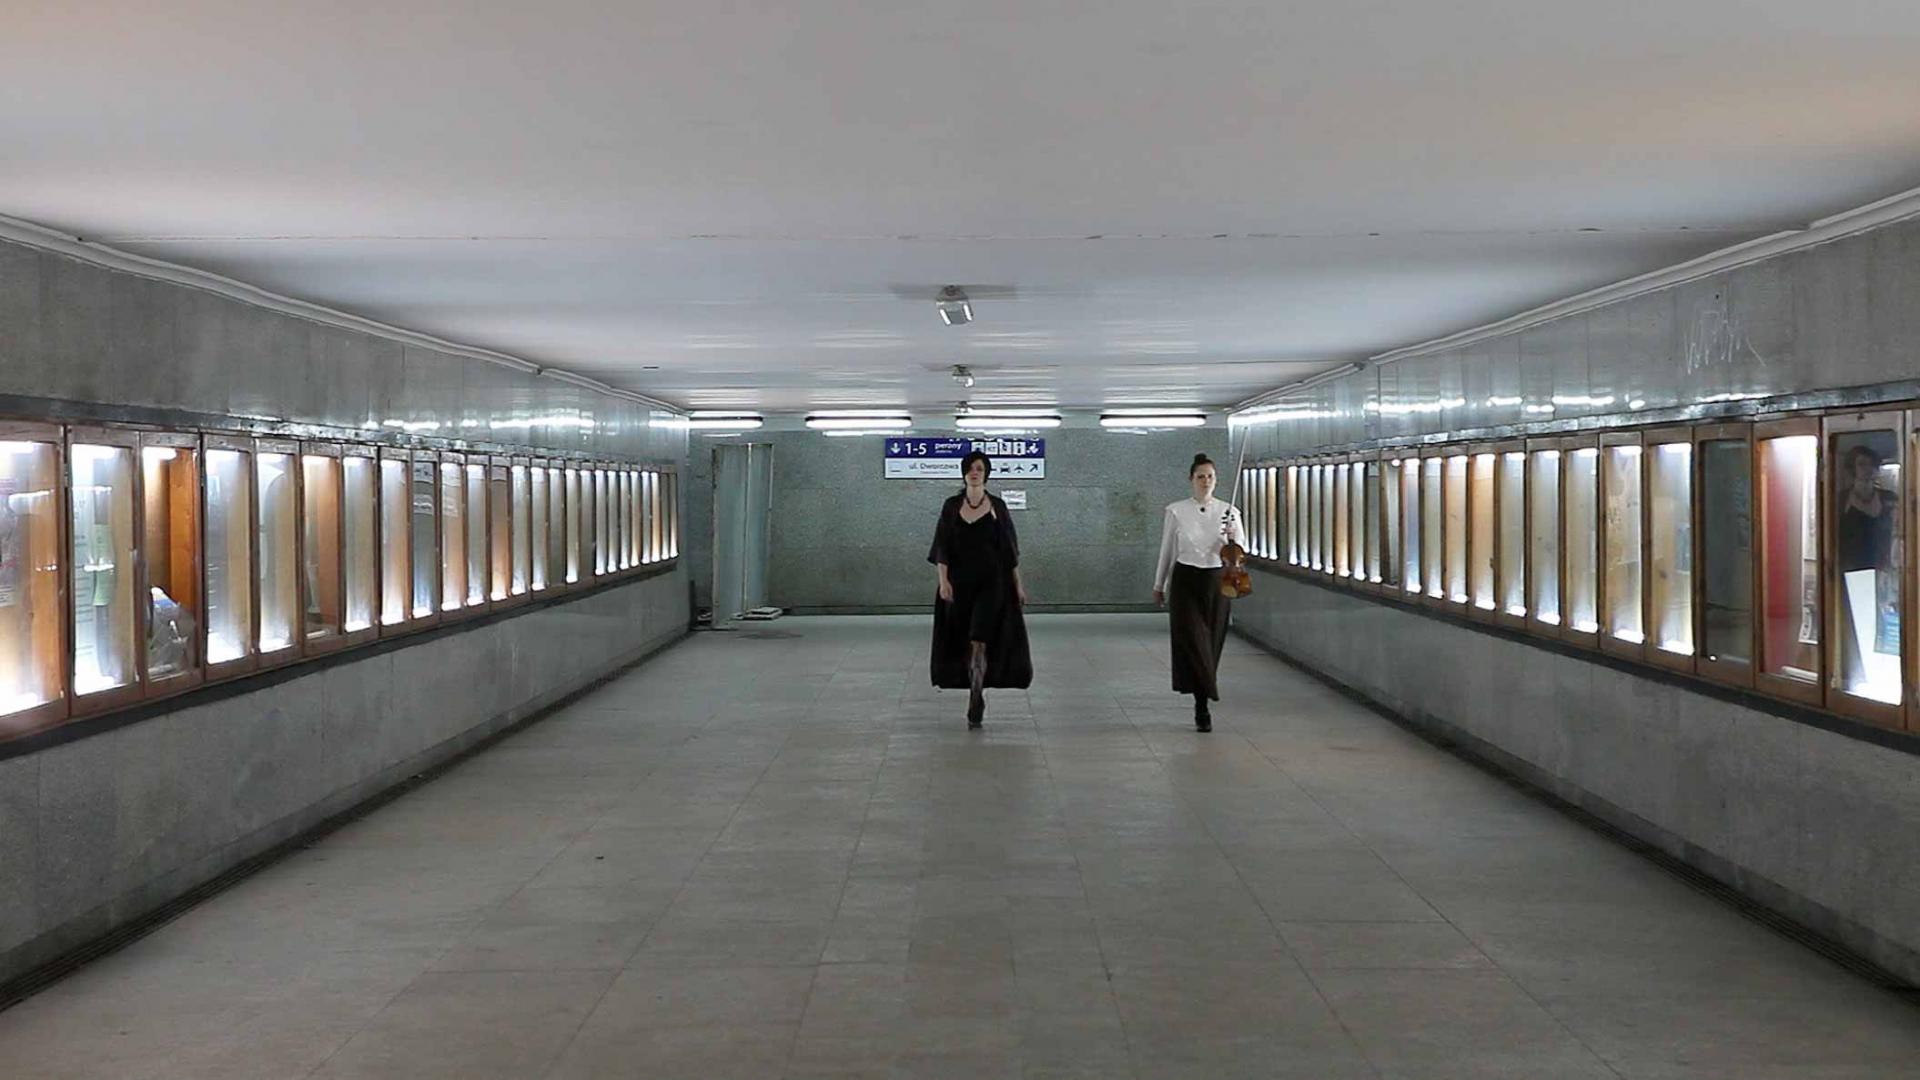 Two woman, one holding a violin and bow, walk towards the camera in an empty concrete hallway